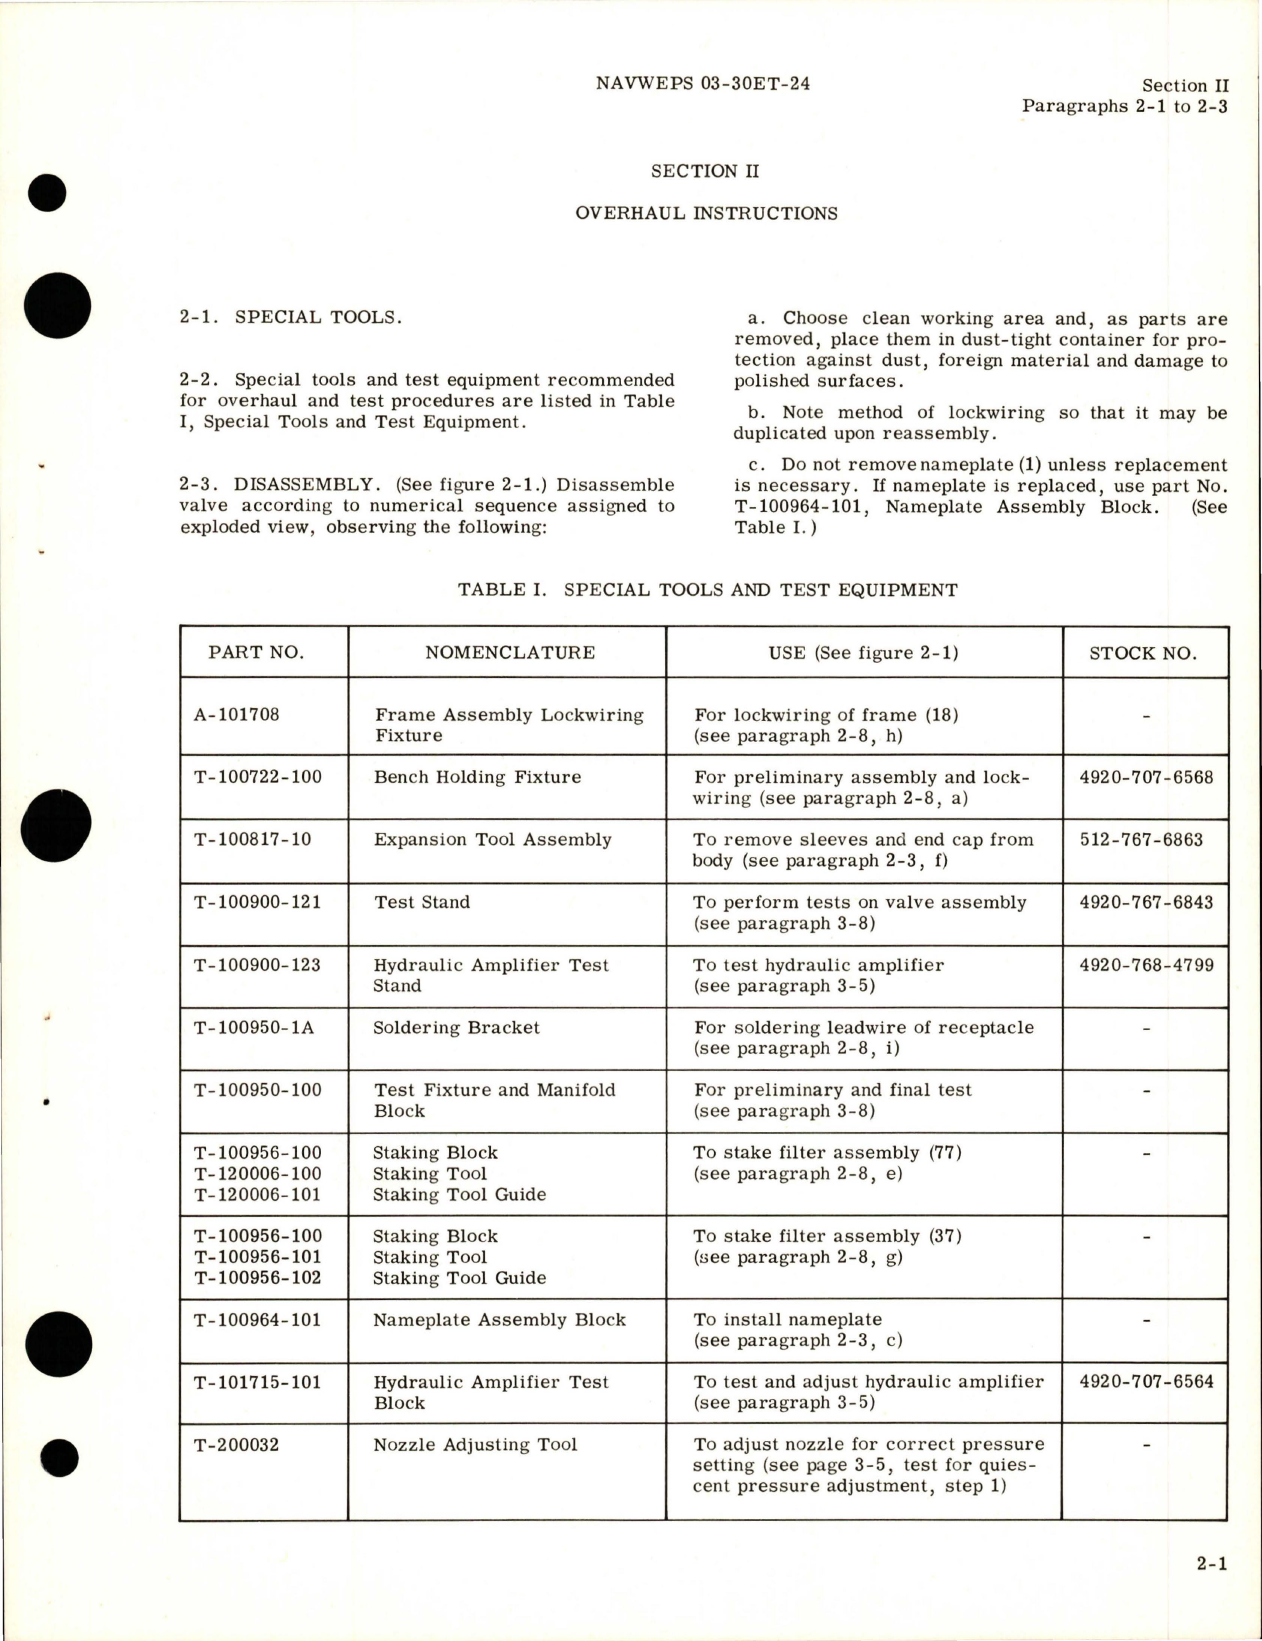 Sample page 7 from AirCorps Library document: Overhaul Instructions for Electro-Mechanical Input Hydraulic Servo Control Valve Assy - Part 100950-1